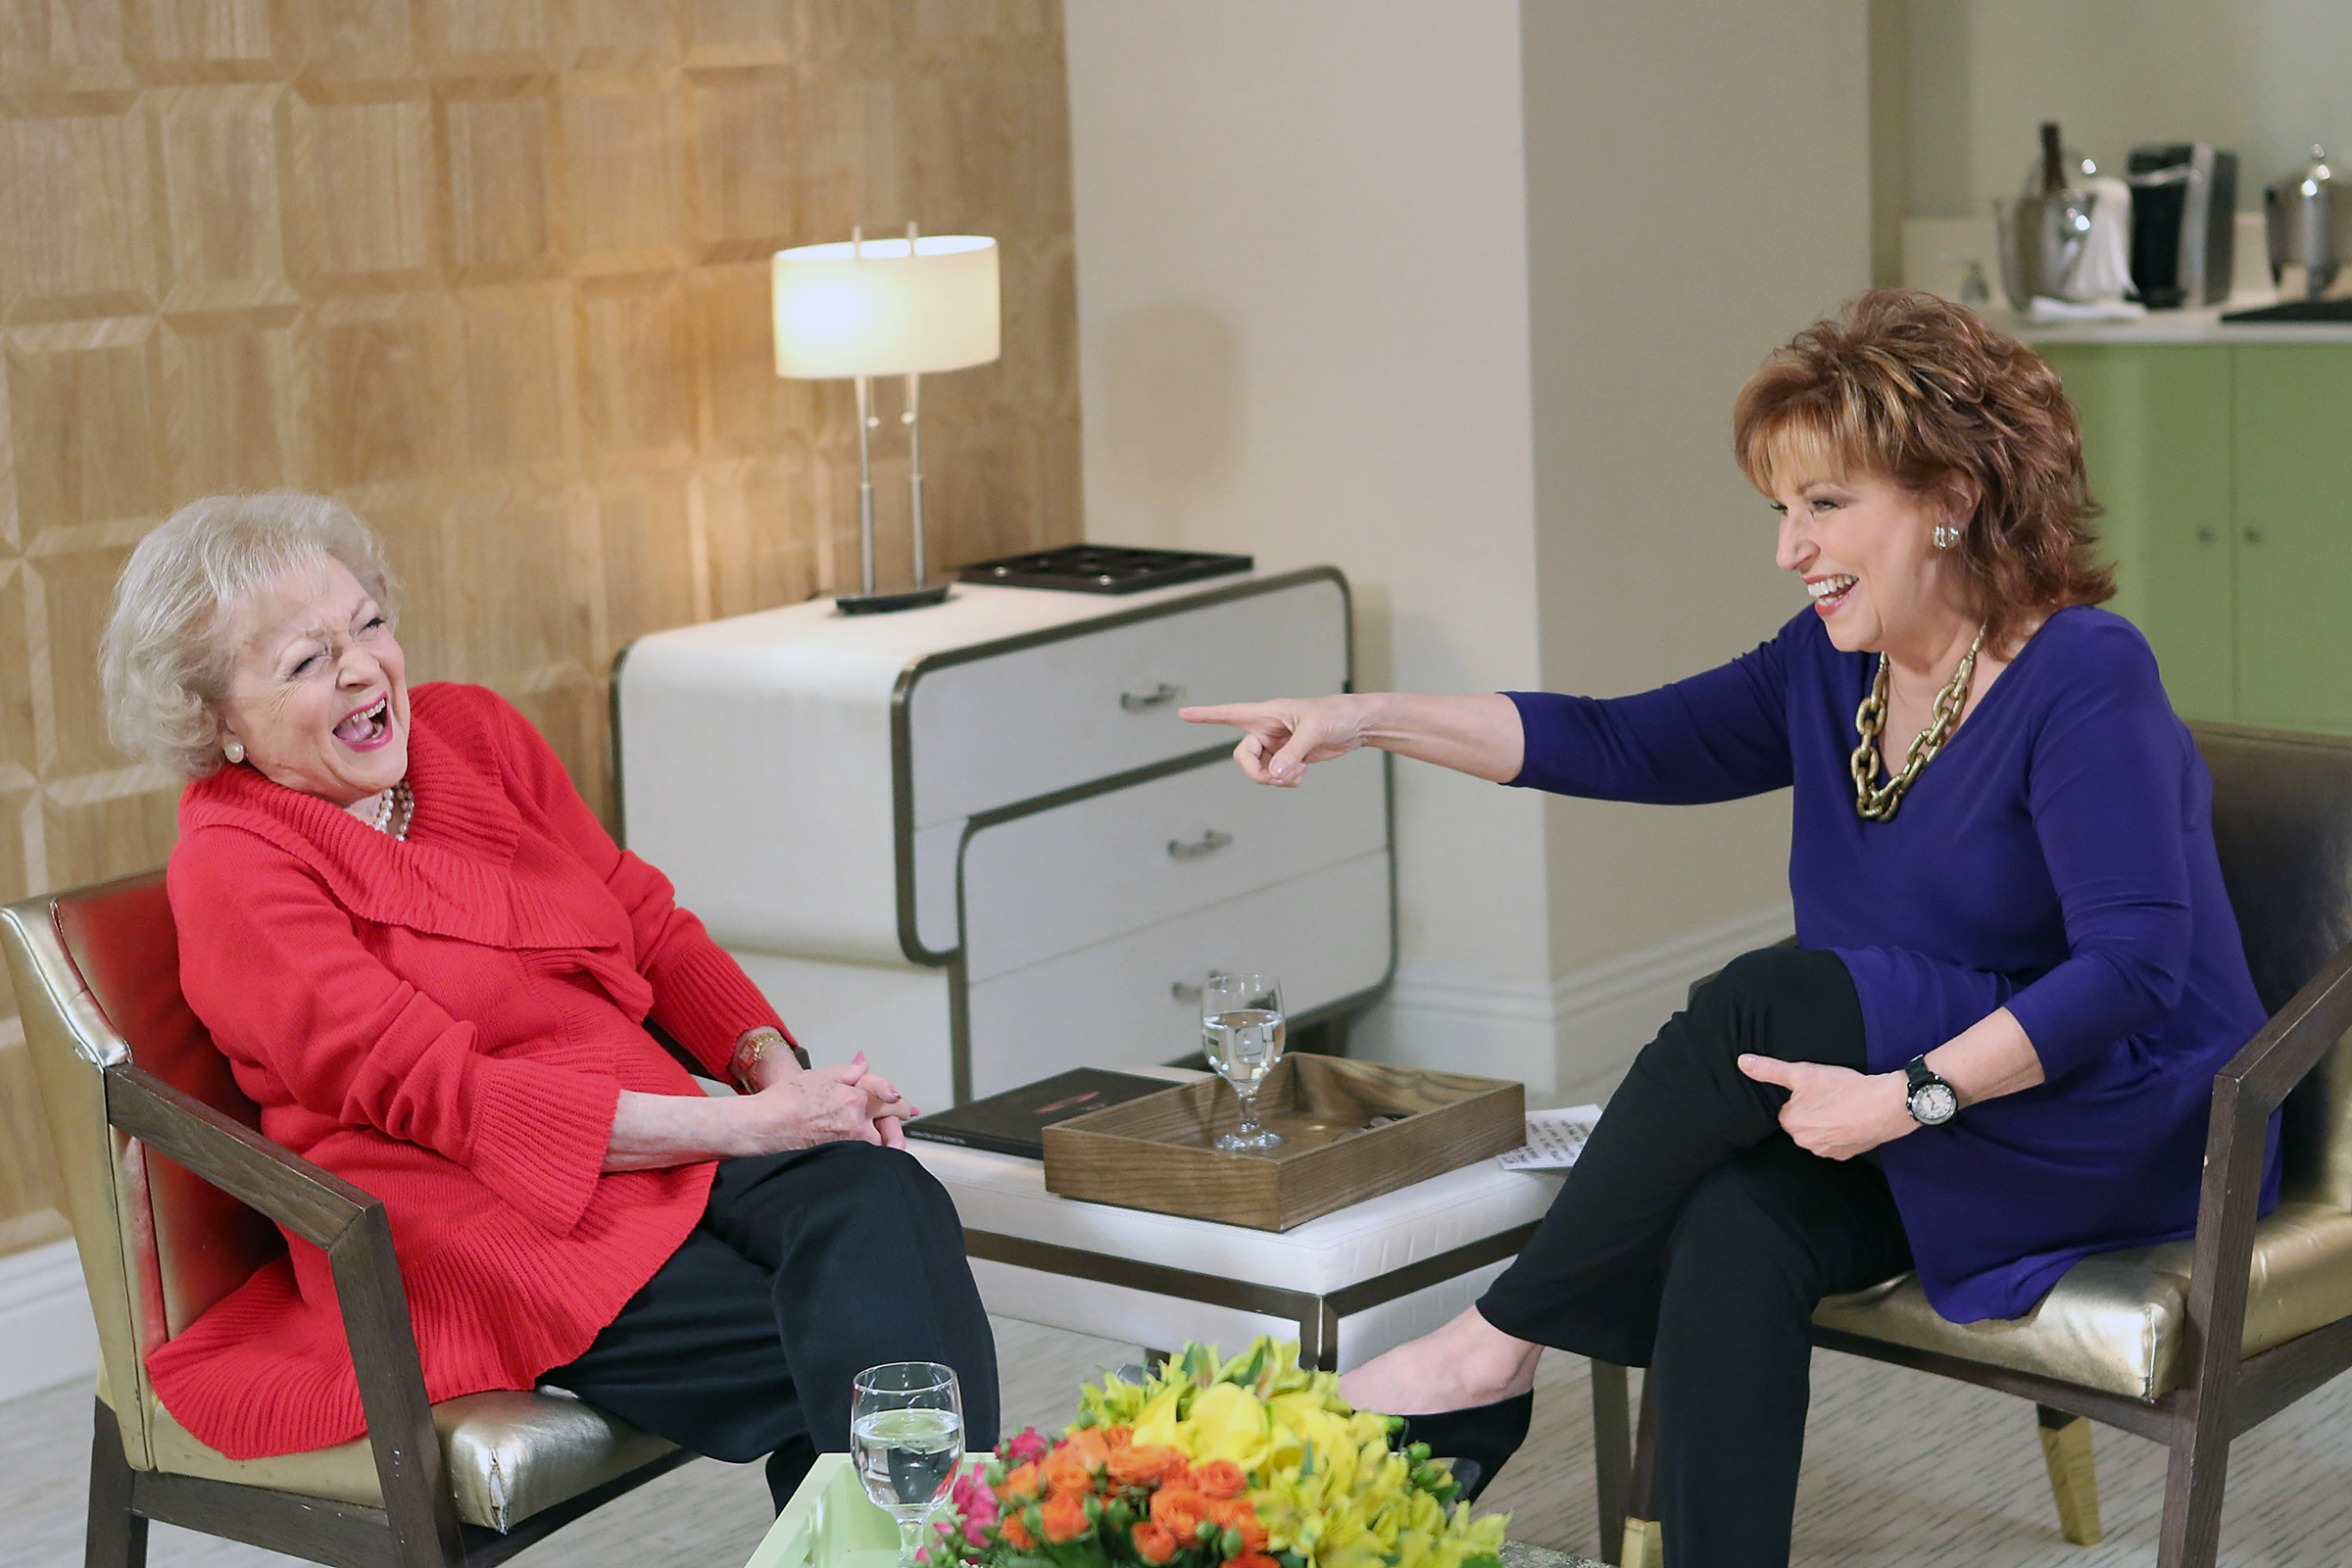 Betty White and Joy Behar on set for Current TV at The London Hotel in West Hollywood, Calif., on January 2, 2013. (Getty Images)